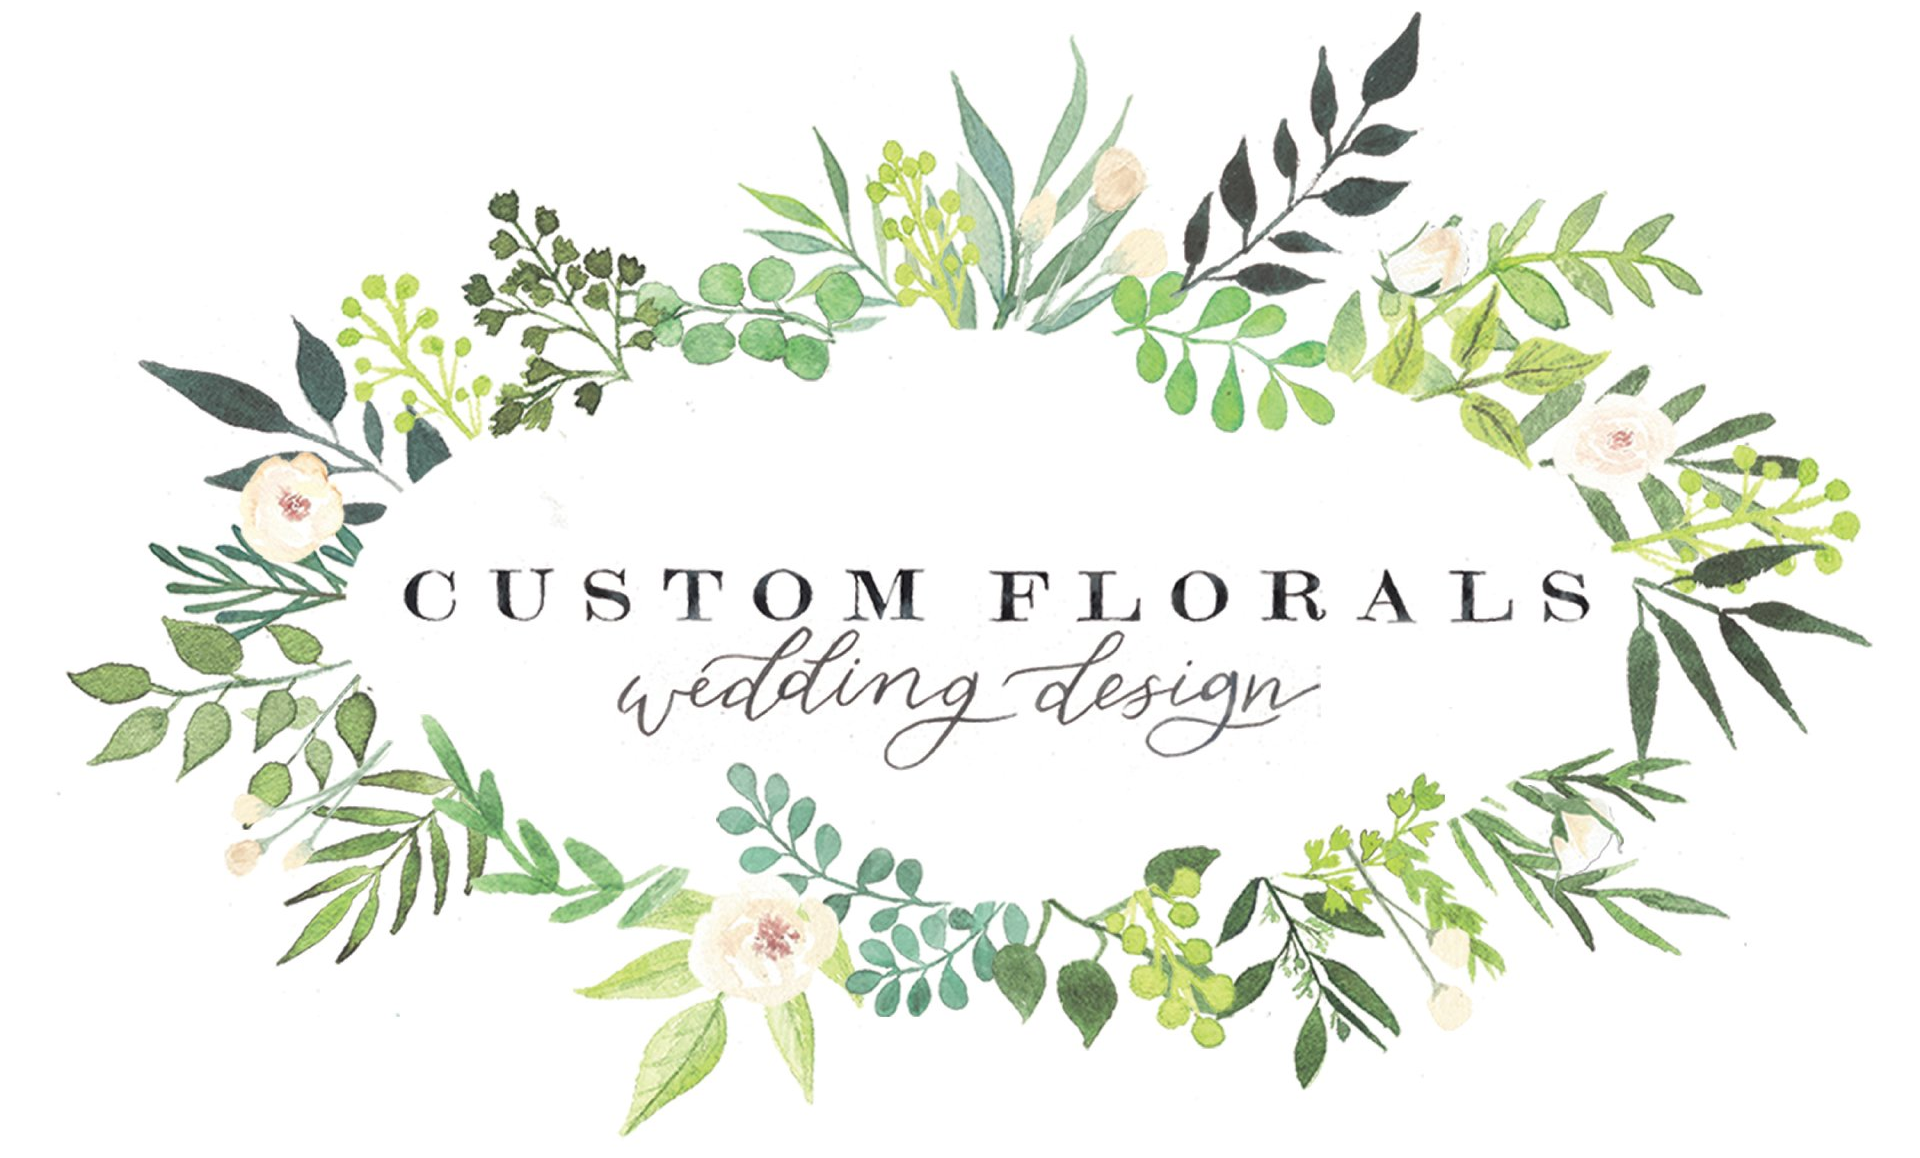 Custom Florals Lancaster, Pa, Wedding Flowers and Design for Every Bride